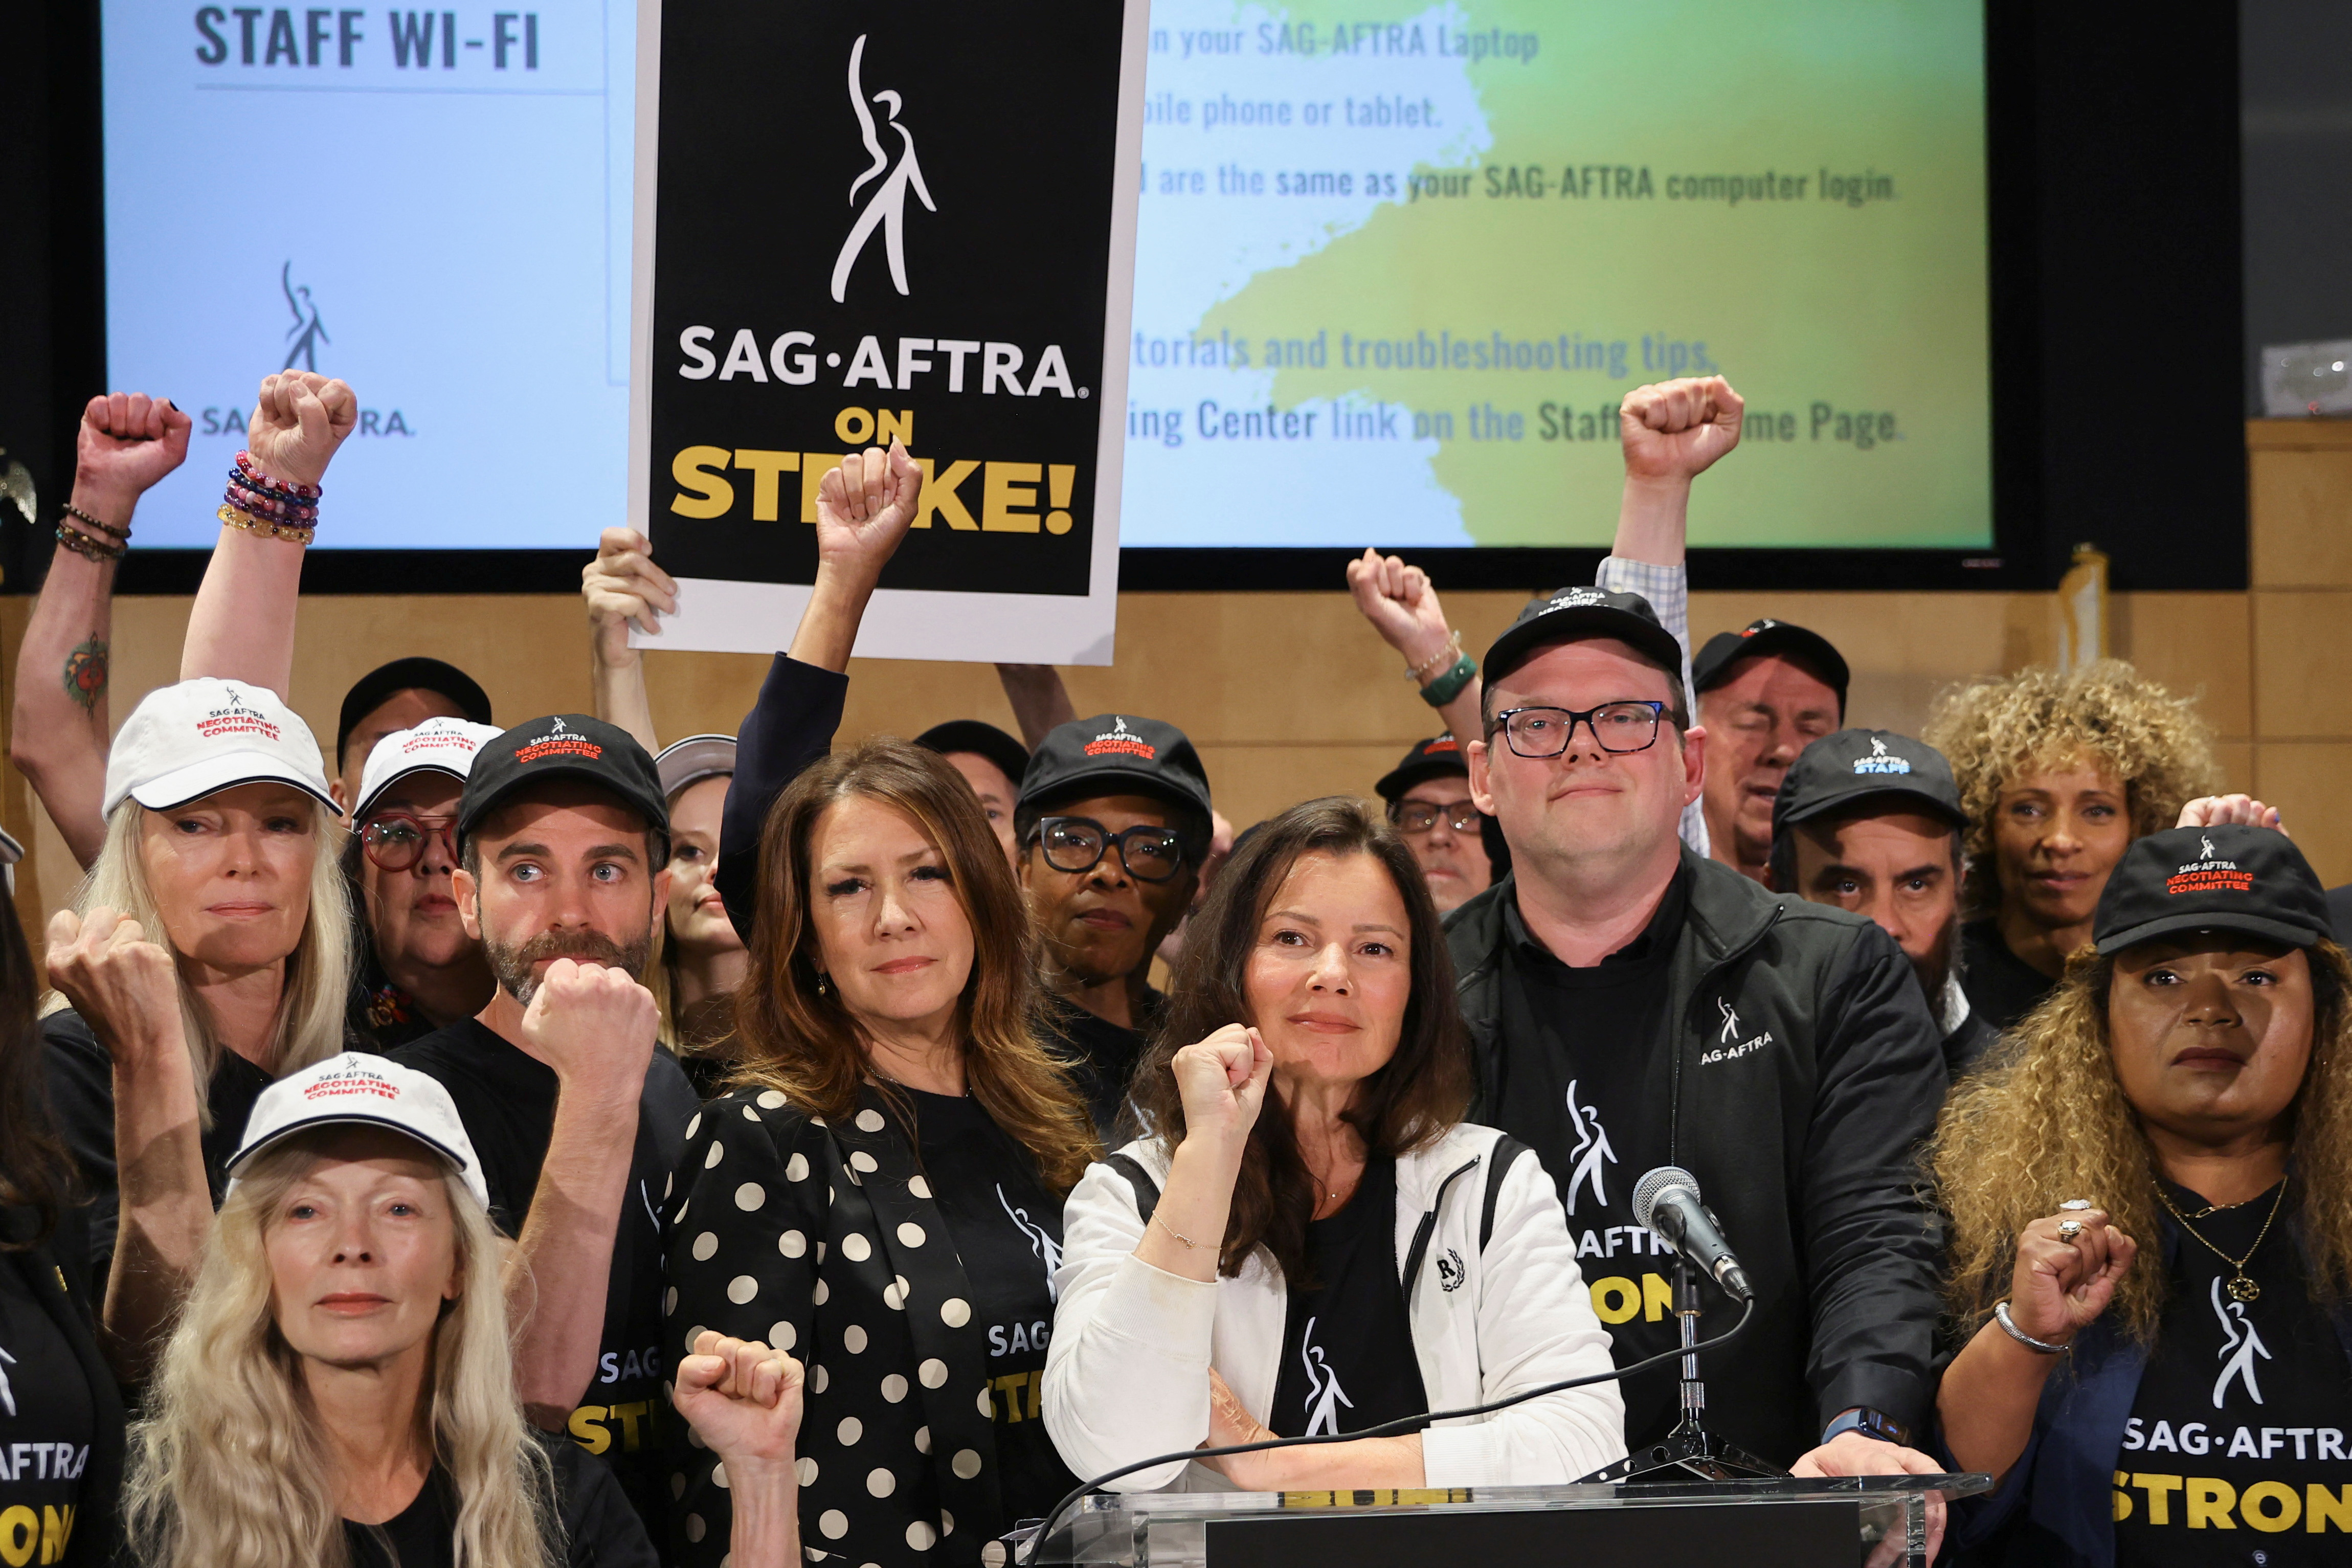 SAG-AFTRA union President Fran Drescher, Duncan Crabtree-Ireland, SAG-AFTRA National Executive Director and Chief Negotiator, and union members gesture at SAG-AFTRA offices after negotiations ended with the Alliance of Motion Picture and Television Producers (AMPTP), the entity that represents major studios and streamers, including Amazon, Apple, Disney, NBCUniversal, Netflix, Paramount, Sony, and Warner Bros Discovery, in Los Angeles, California, U.S., July 13, 2023. REUTERS/Mike Blake